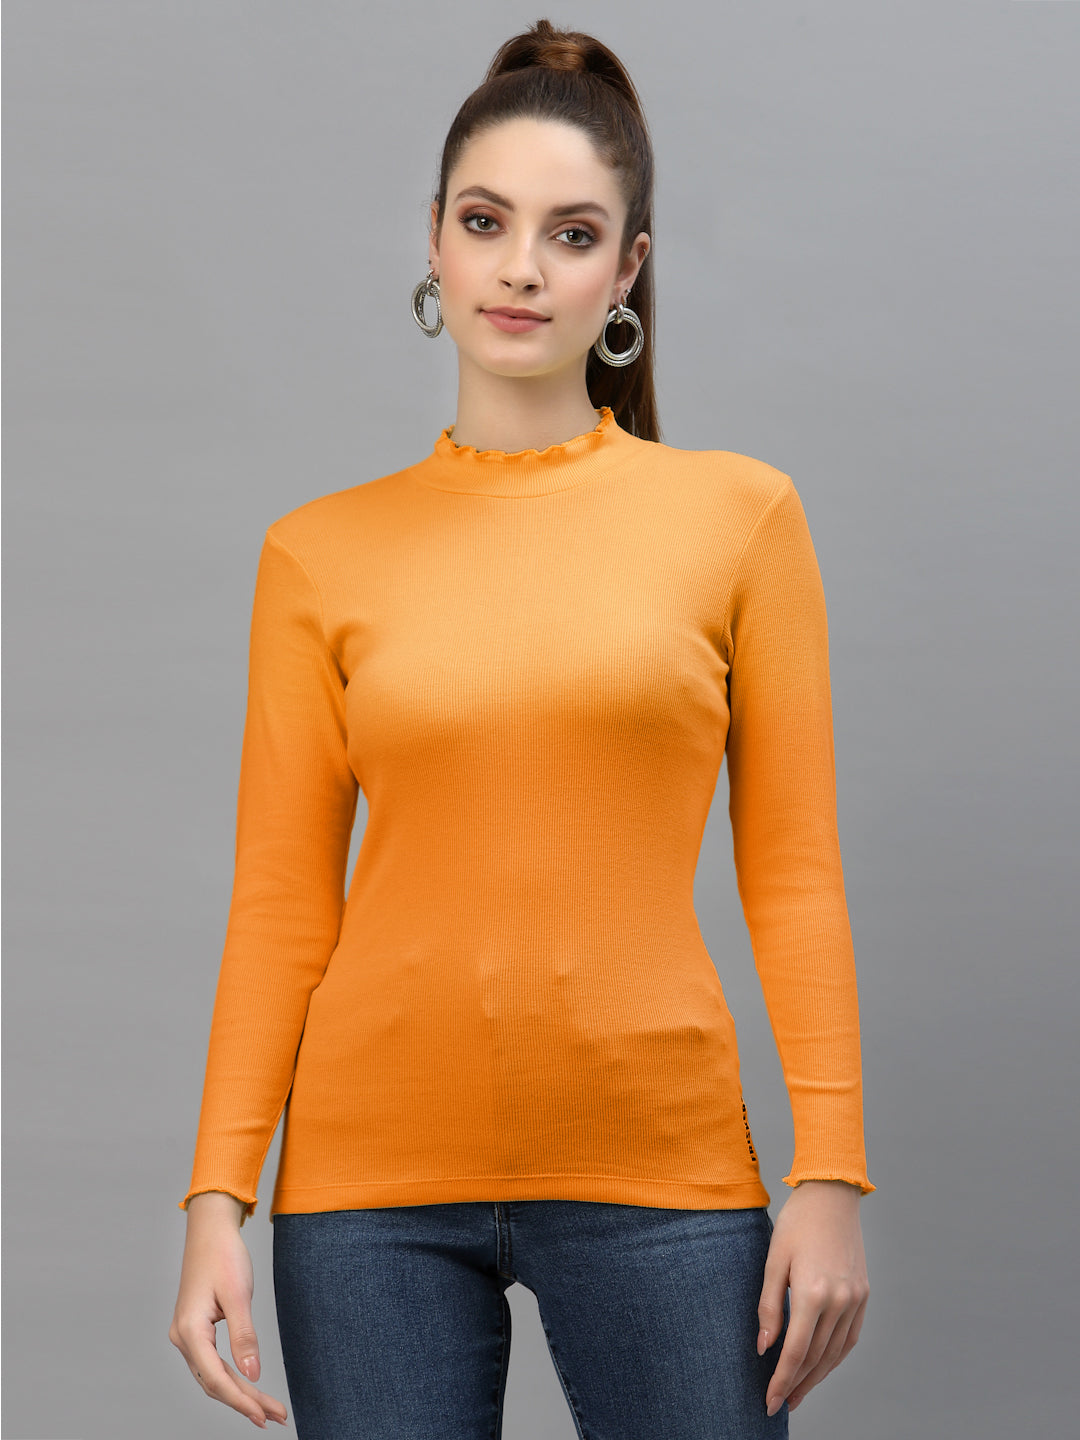 Women Solid Fitted High Neck Full Sleeve Top - Friskers